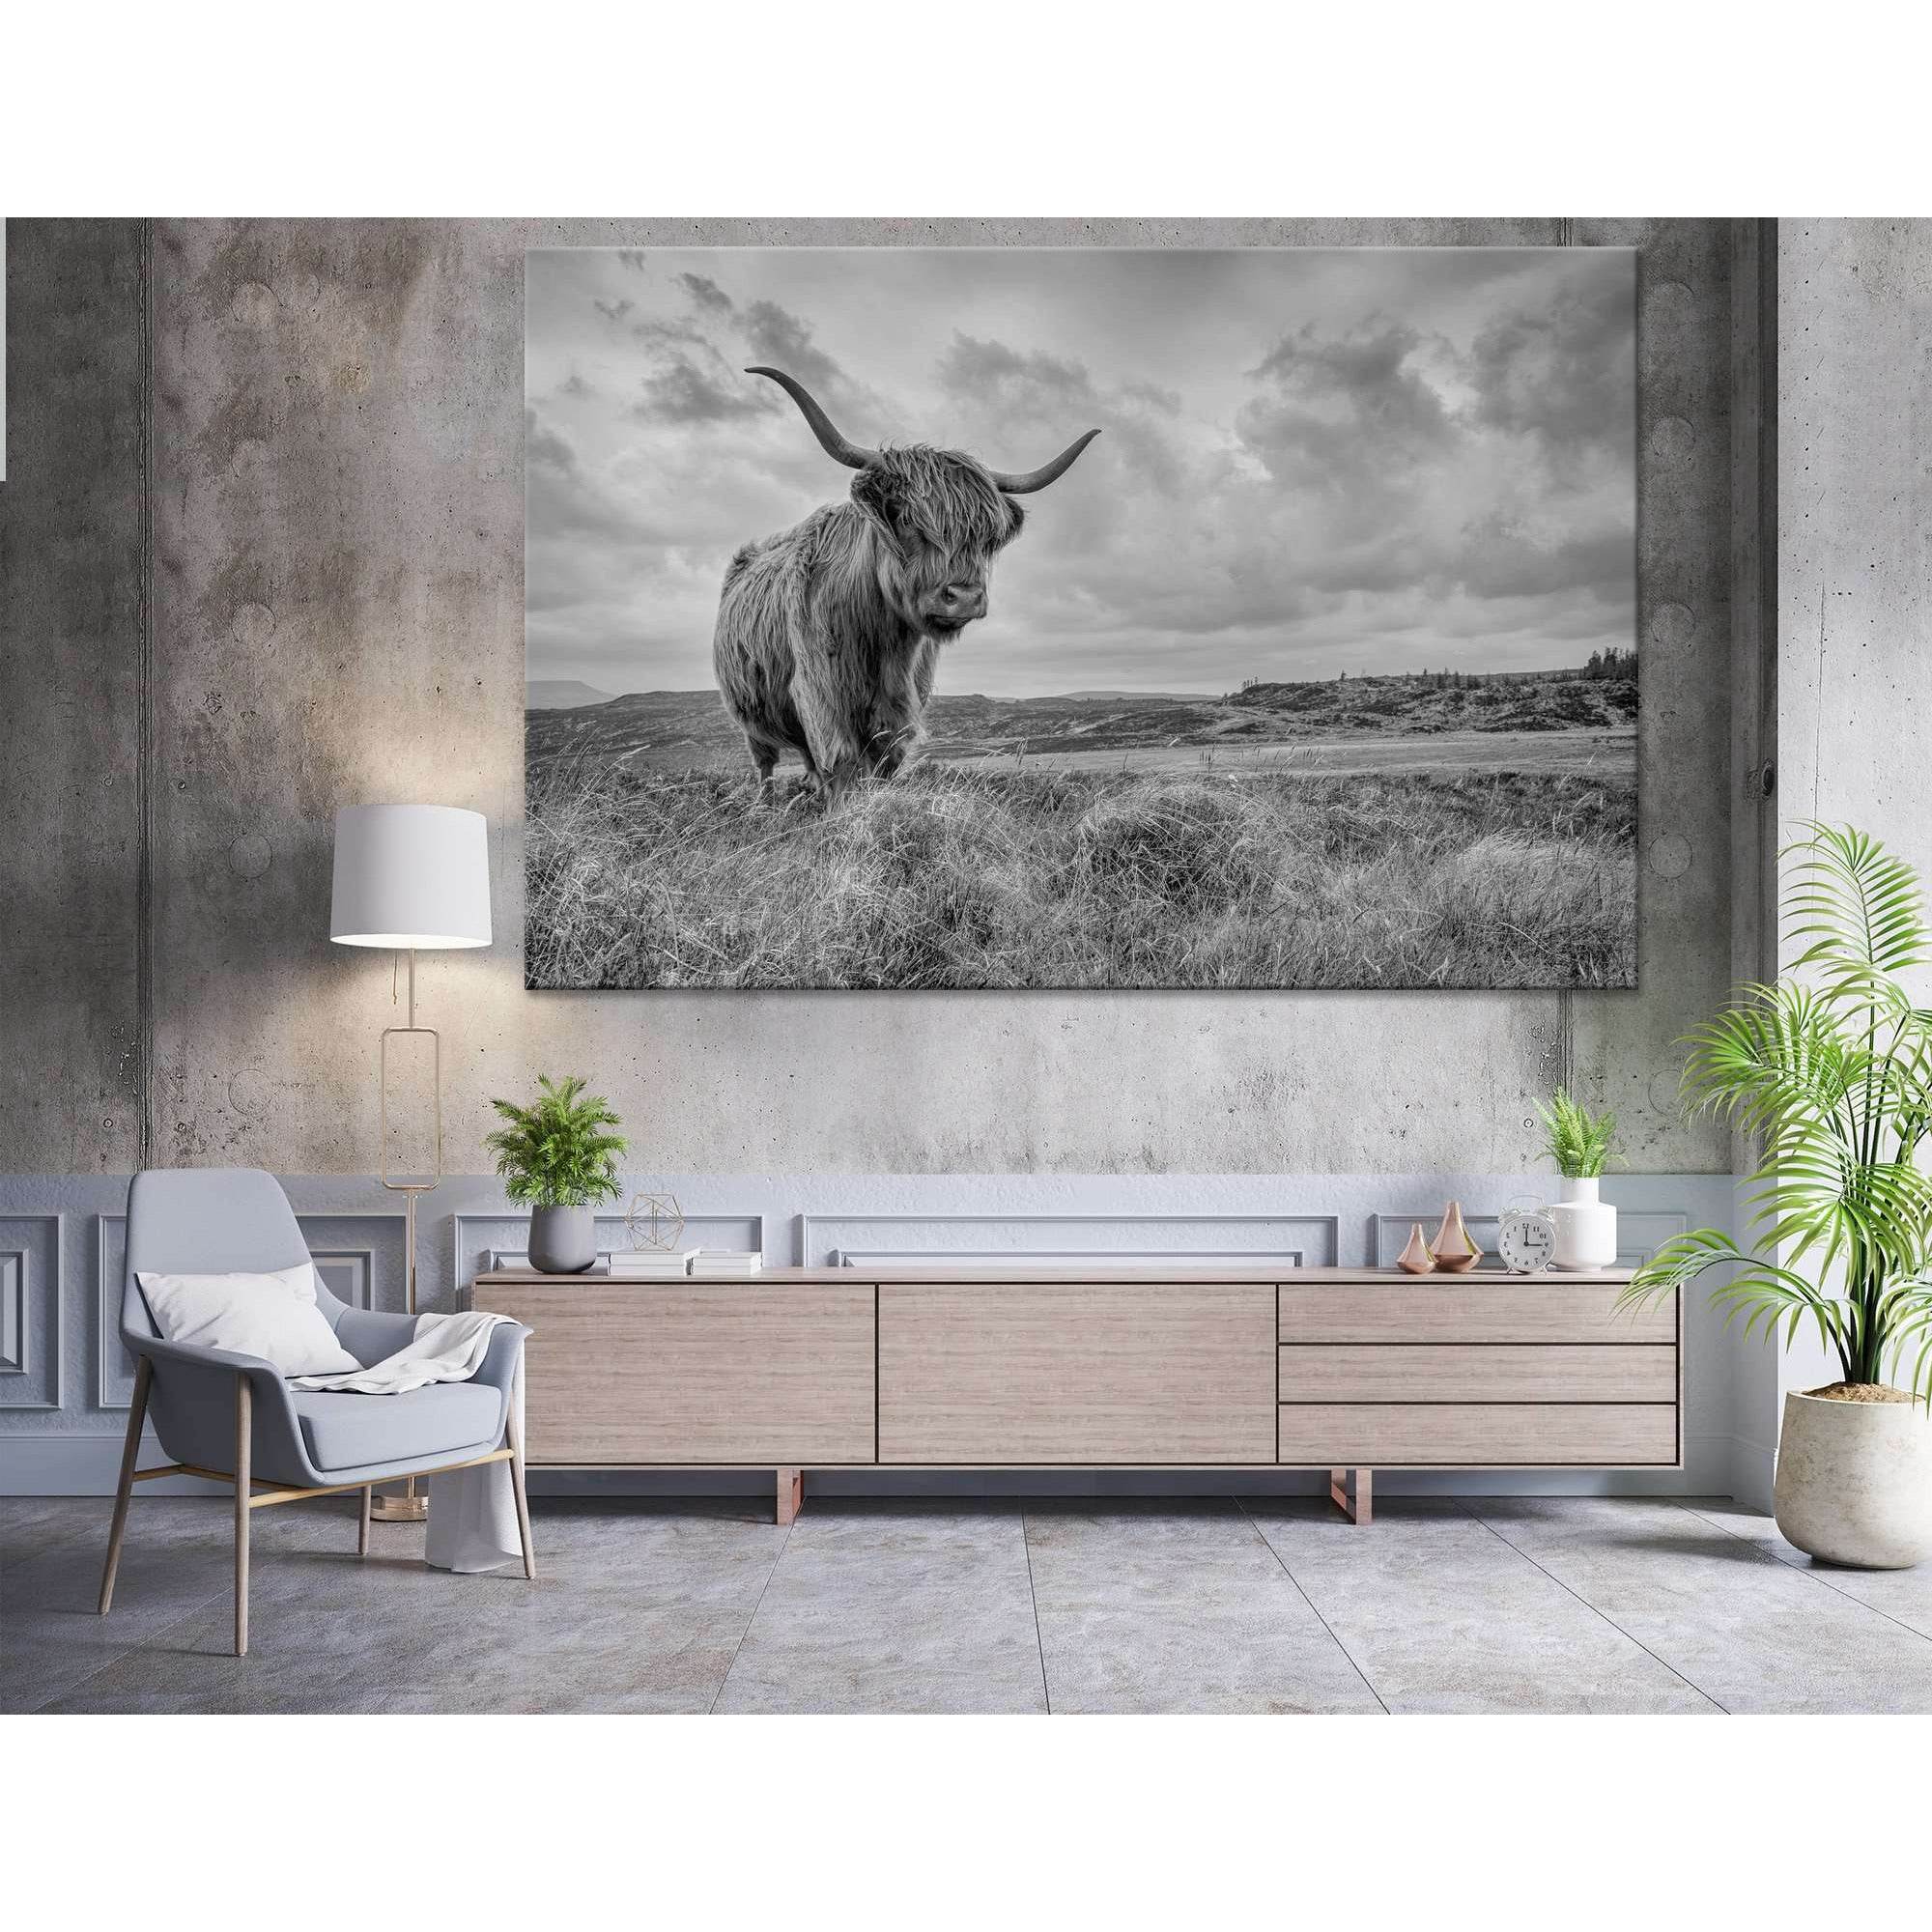 B&W Highland Cow №04125 Ready to Hang Canvas Print